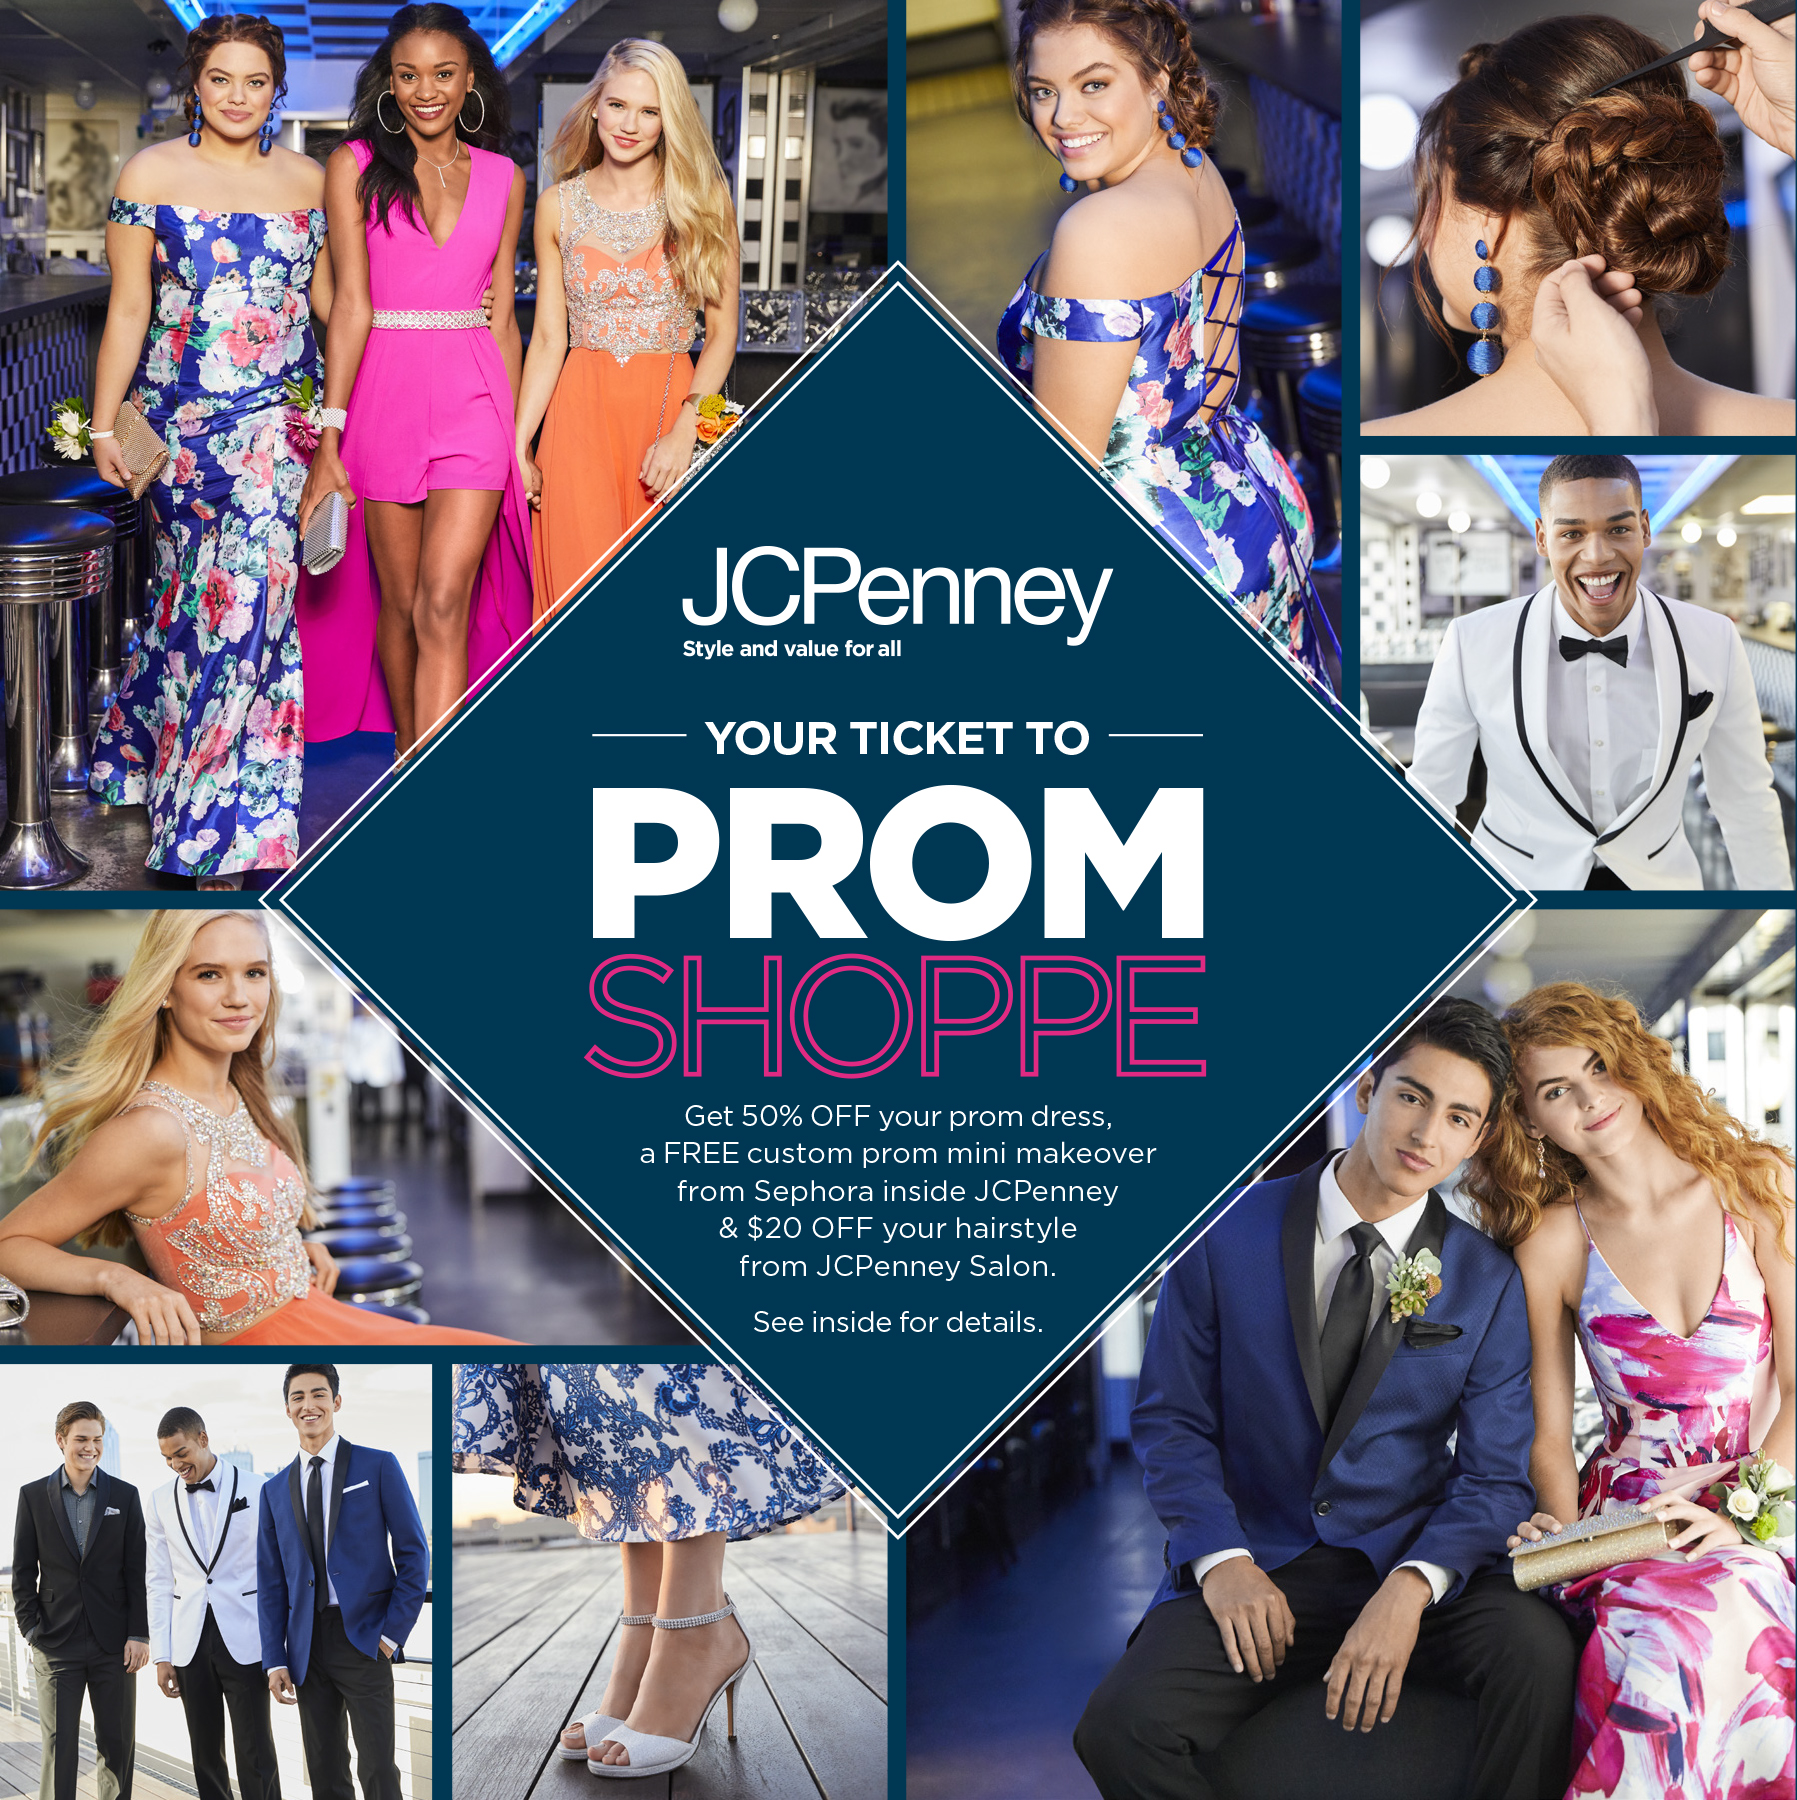 Teens invited to shop for prom necessities at the JCPenney “Get Prepped for  Prom” event - Penney IP LLC